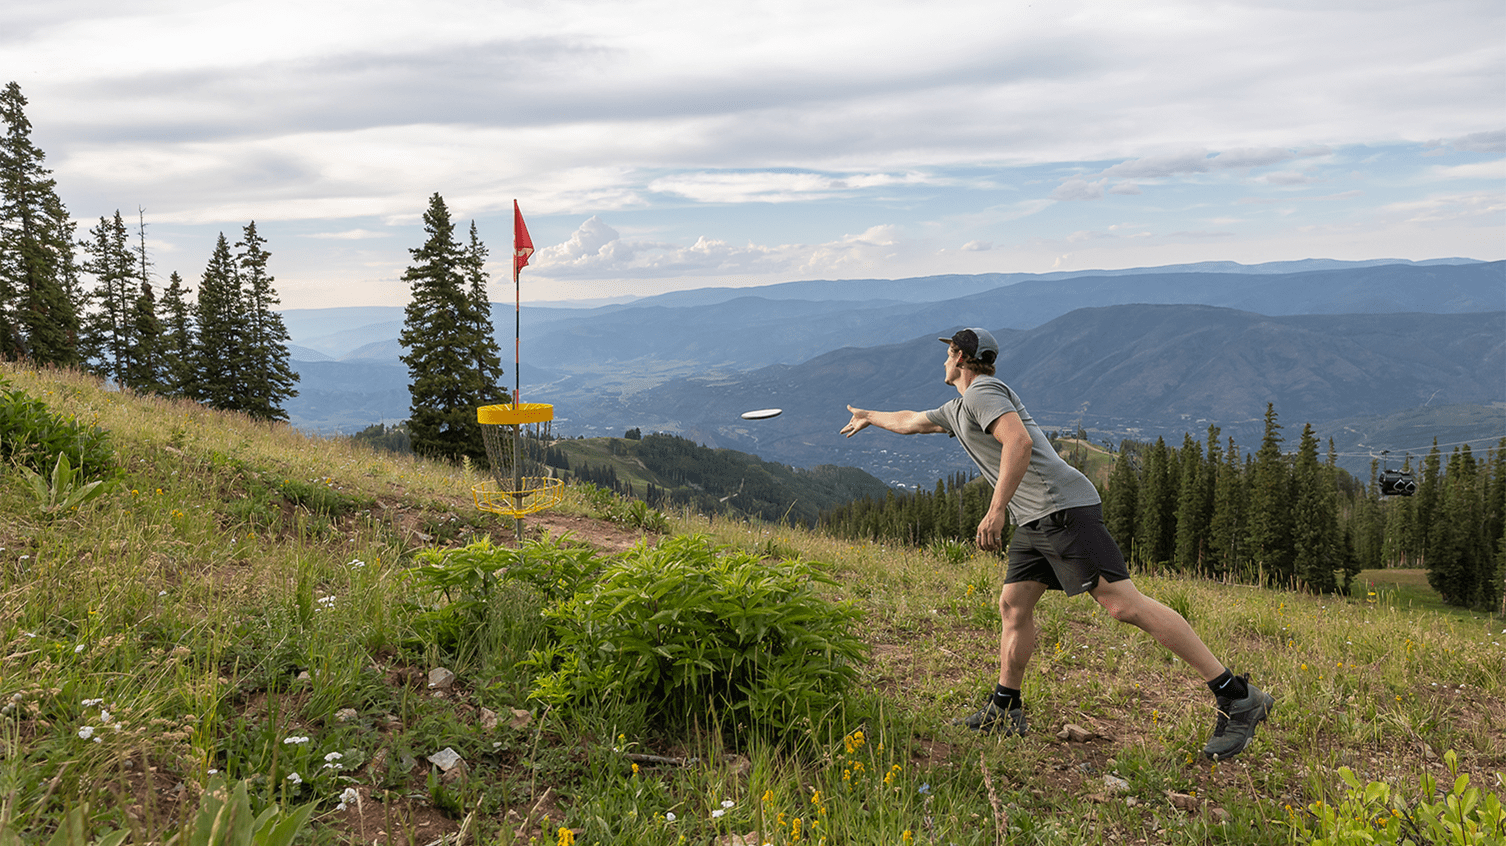 Man plays frisbee golf on Lost Forest, looking out above the valley